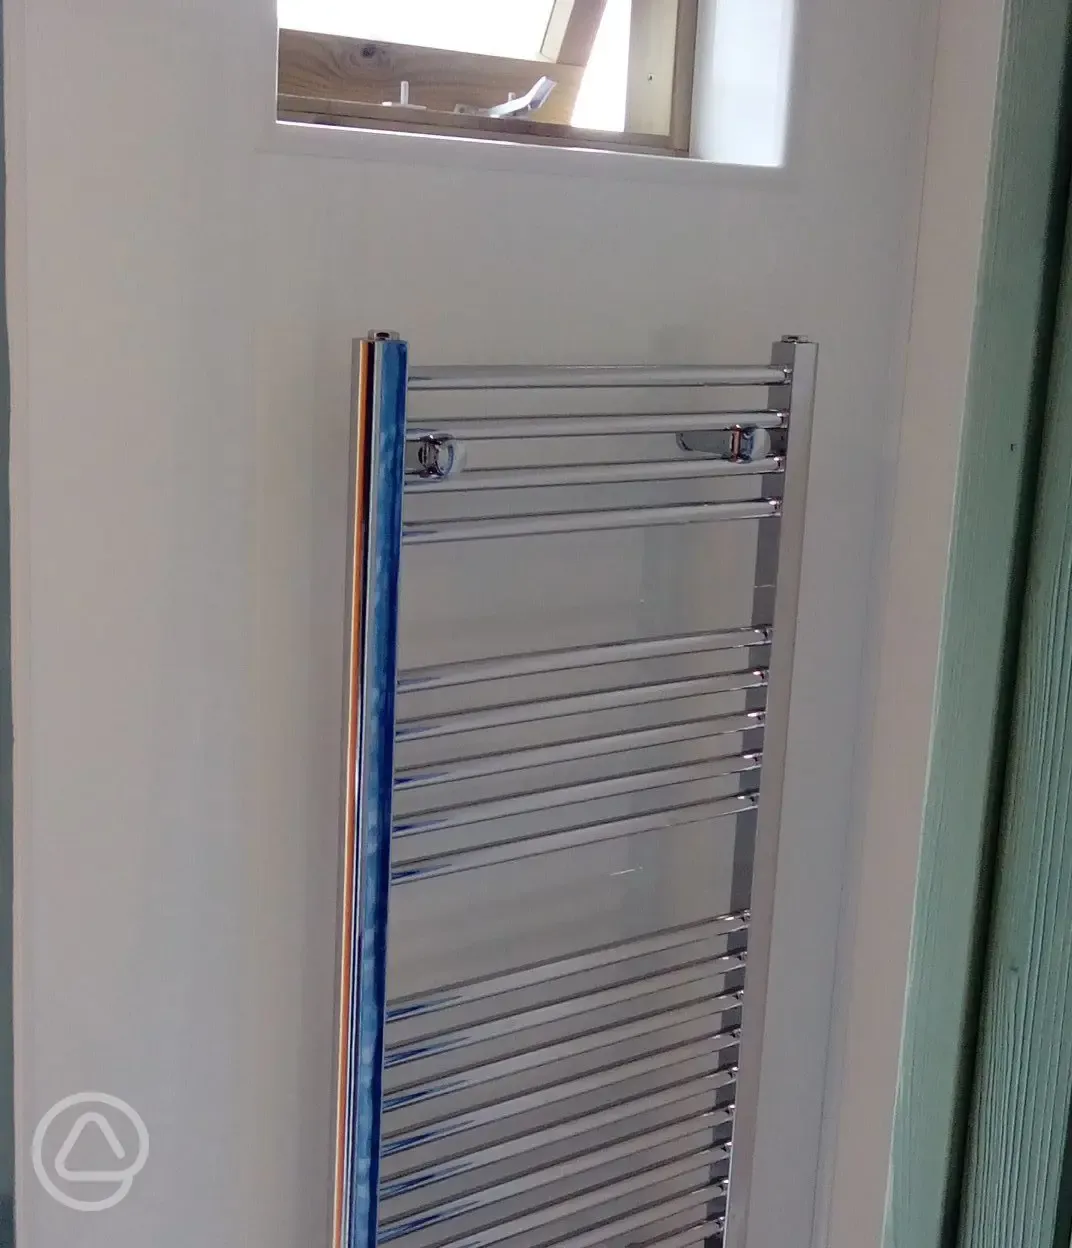 Heated towel rails in the showers